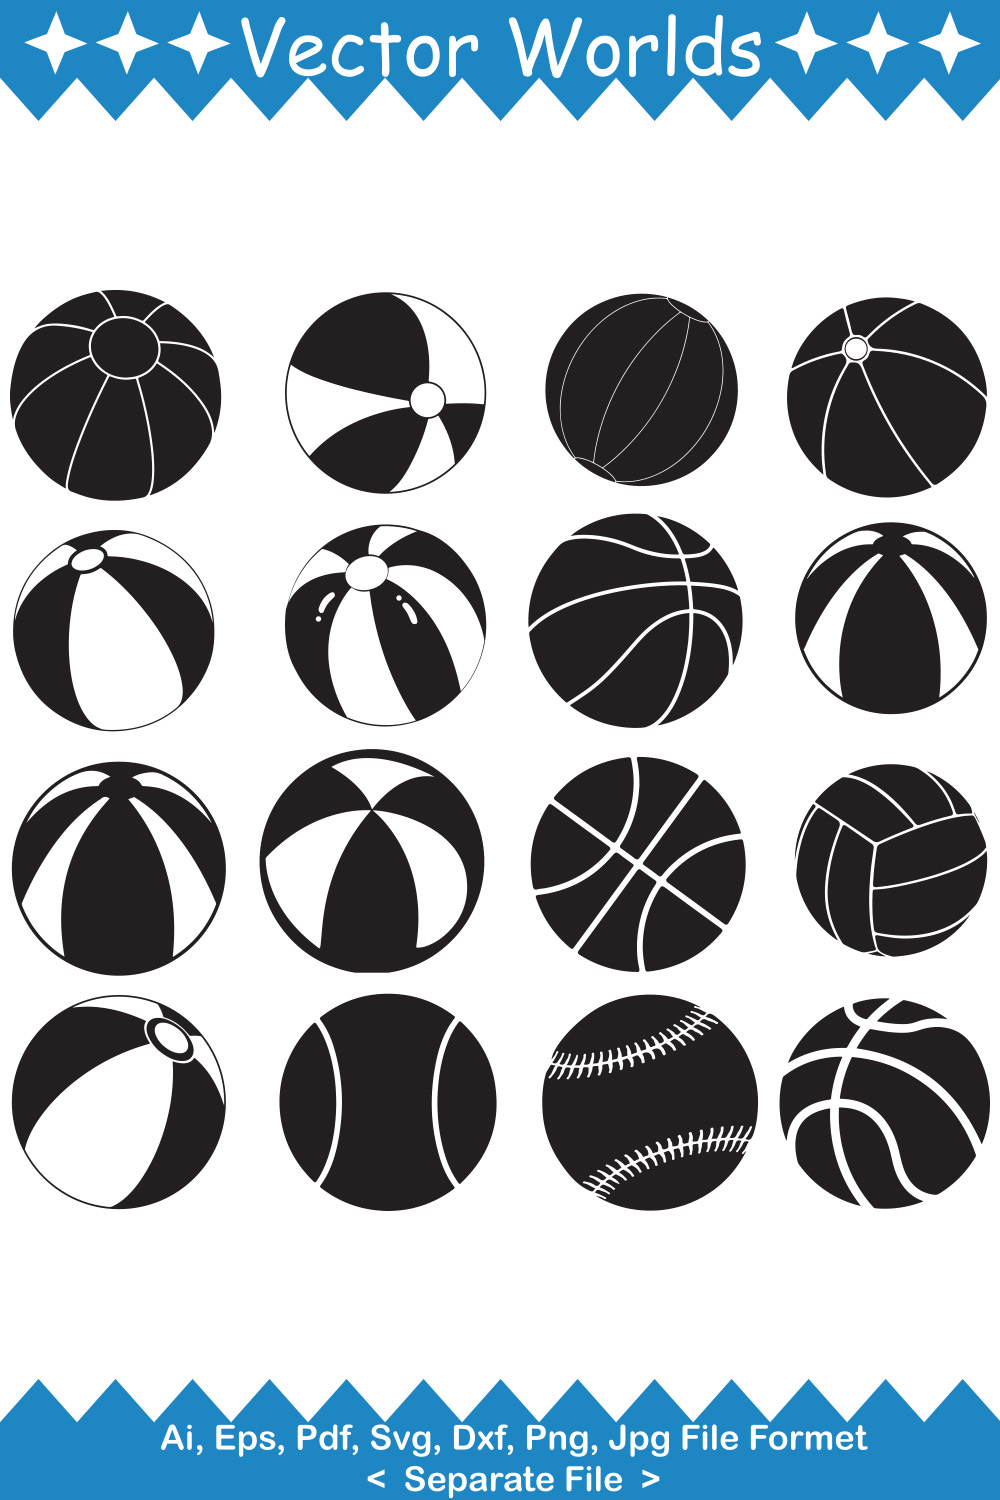 Collection of vector marvelous images of beach balls in black color.